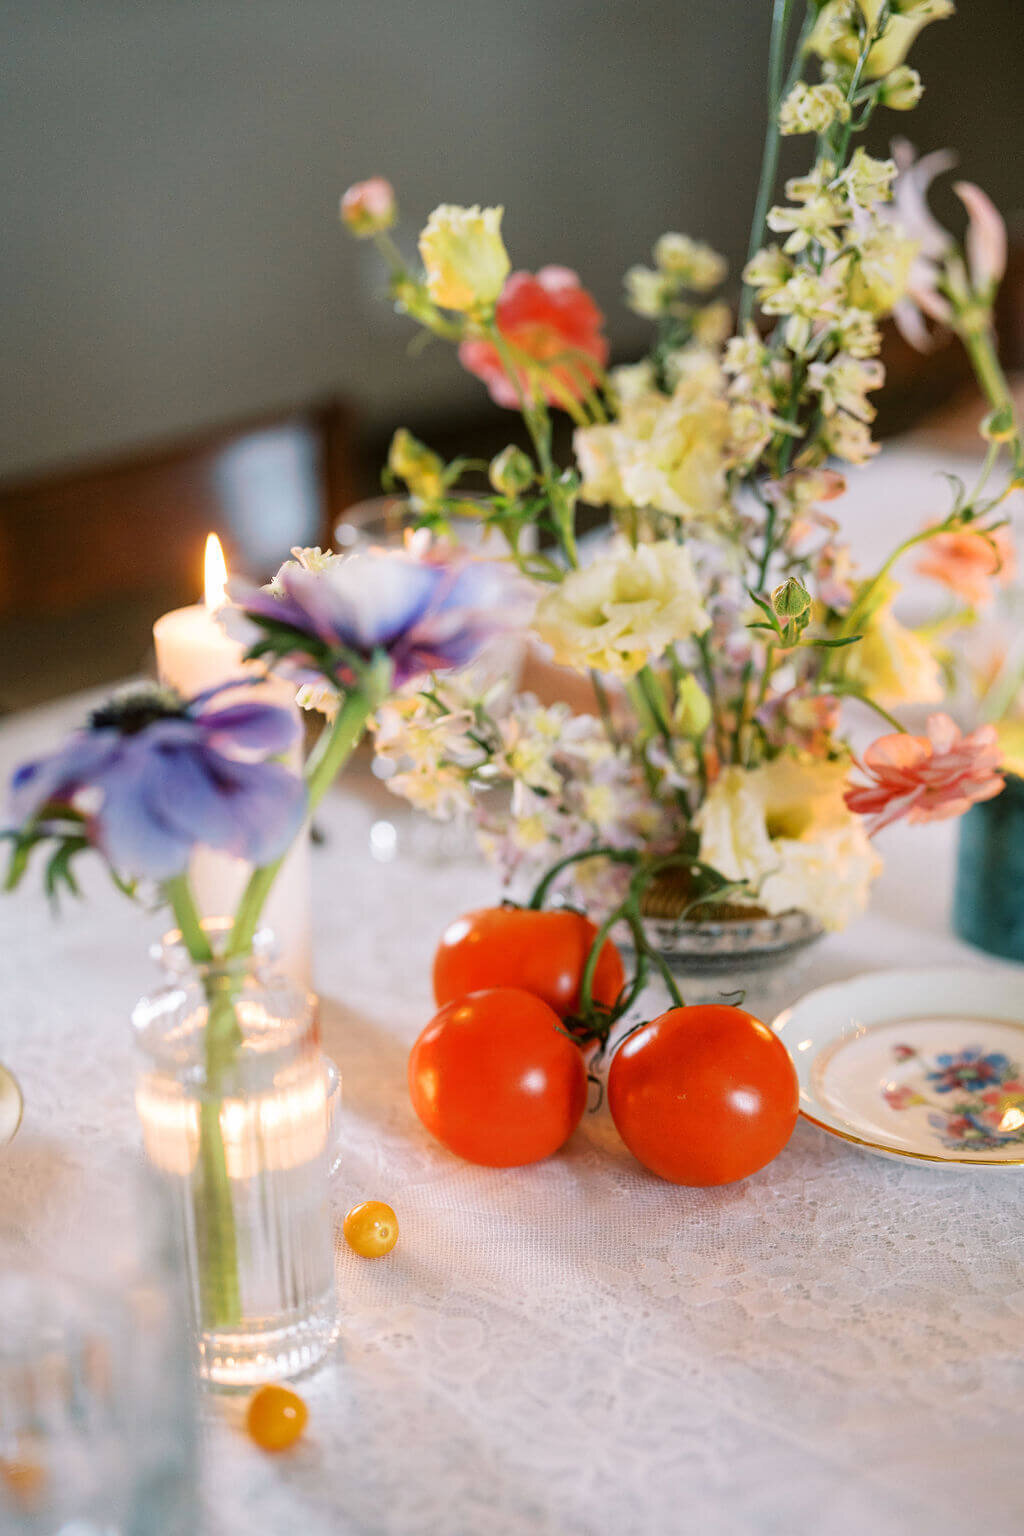 Tomatoes being used as wedding reception decor